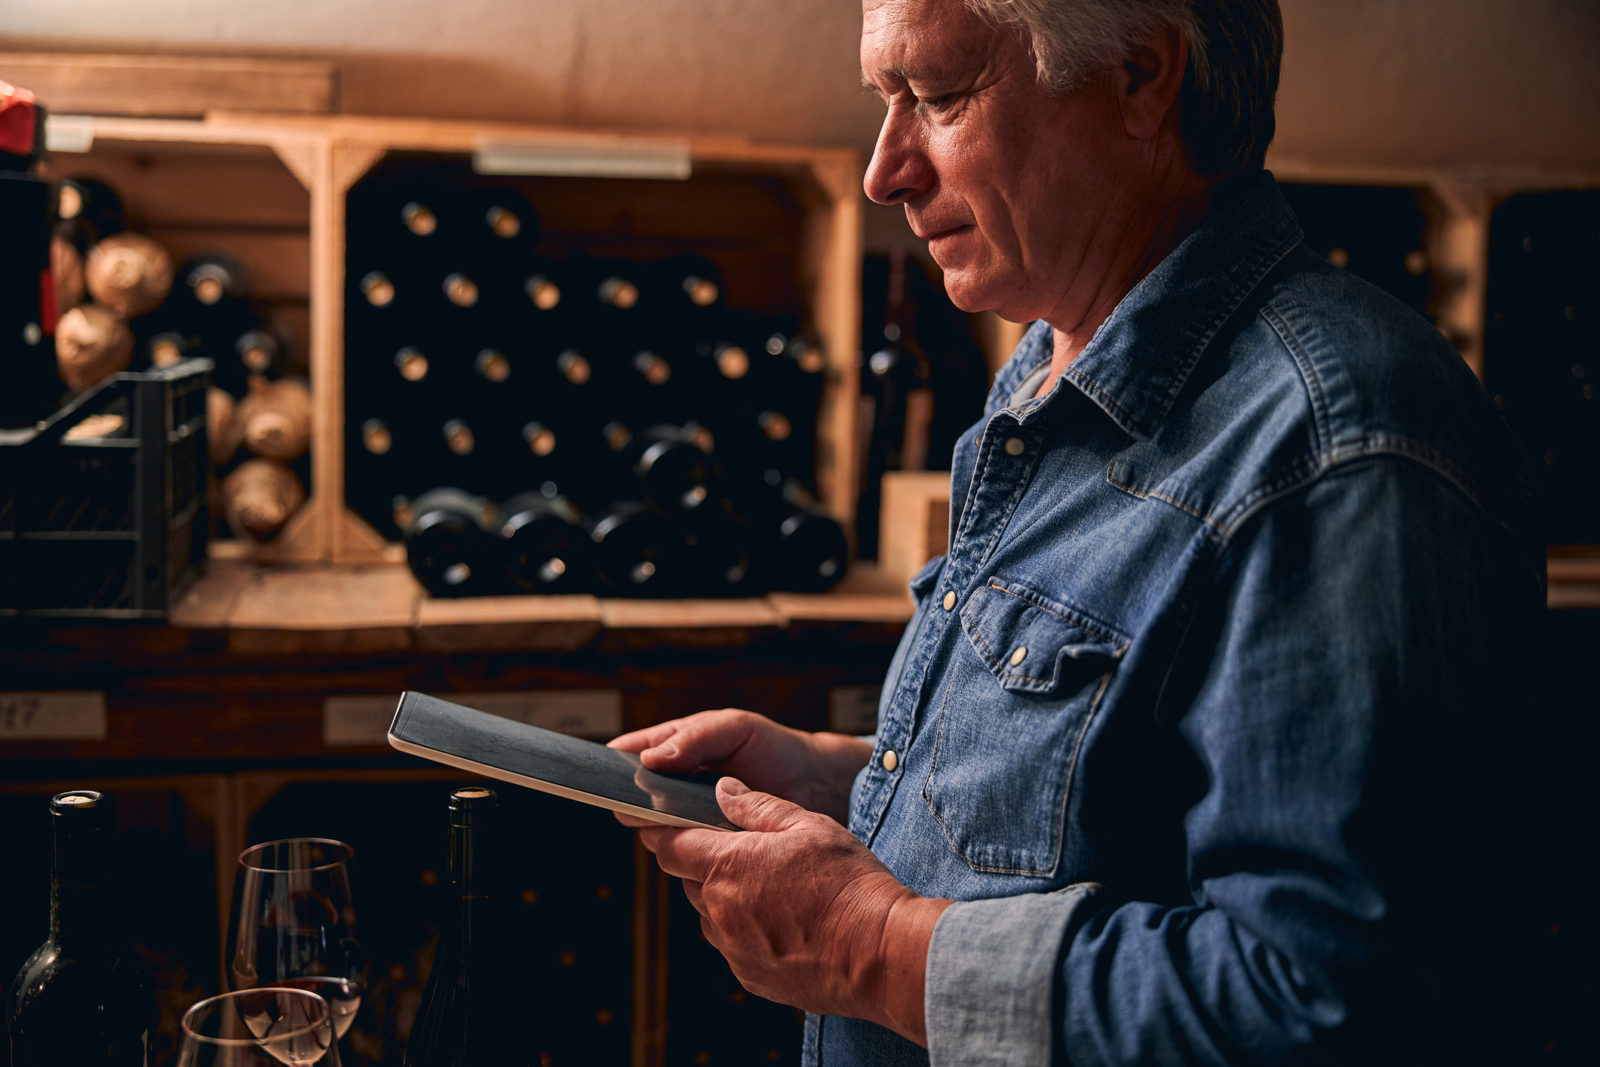 wine cellar worker using wholesale distribution software to manage winery sales orders, surrounded by bottled wine